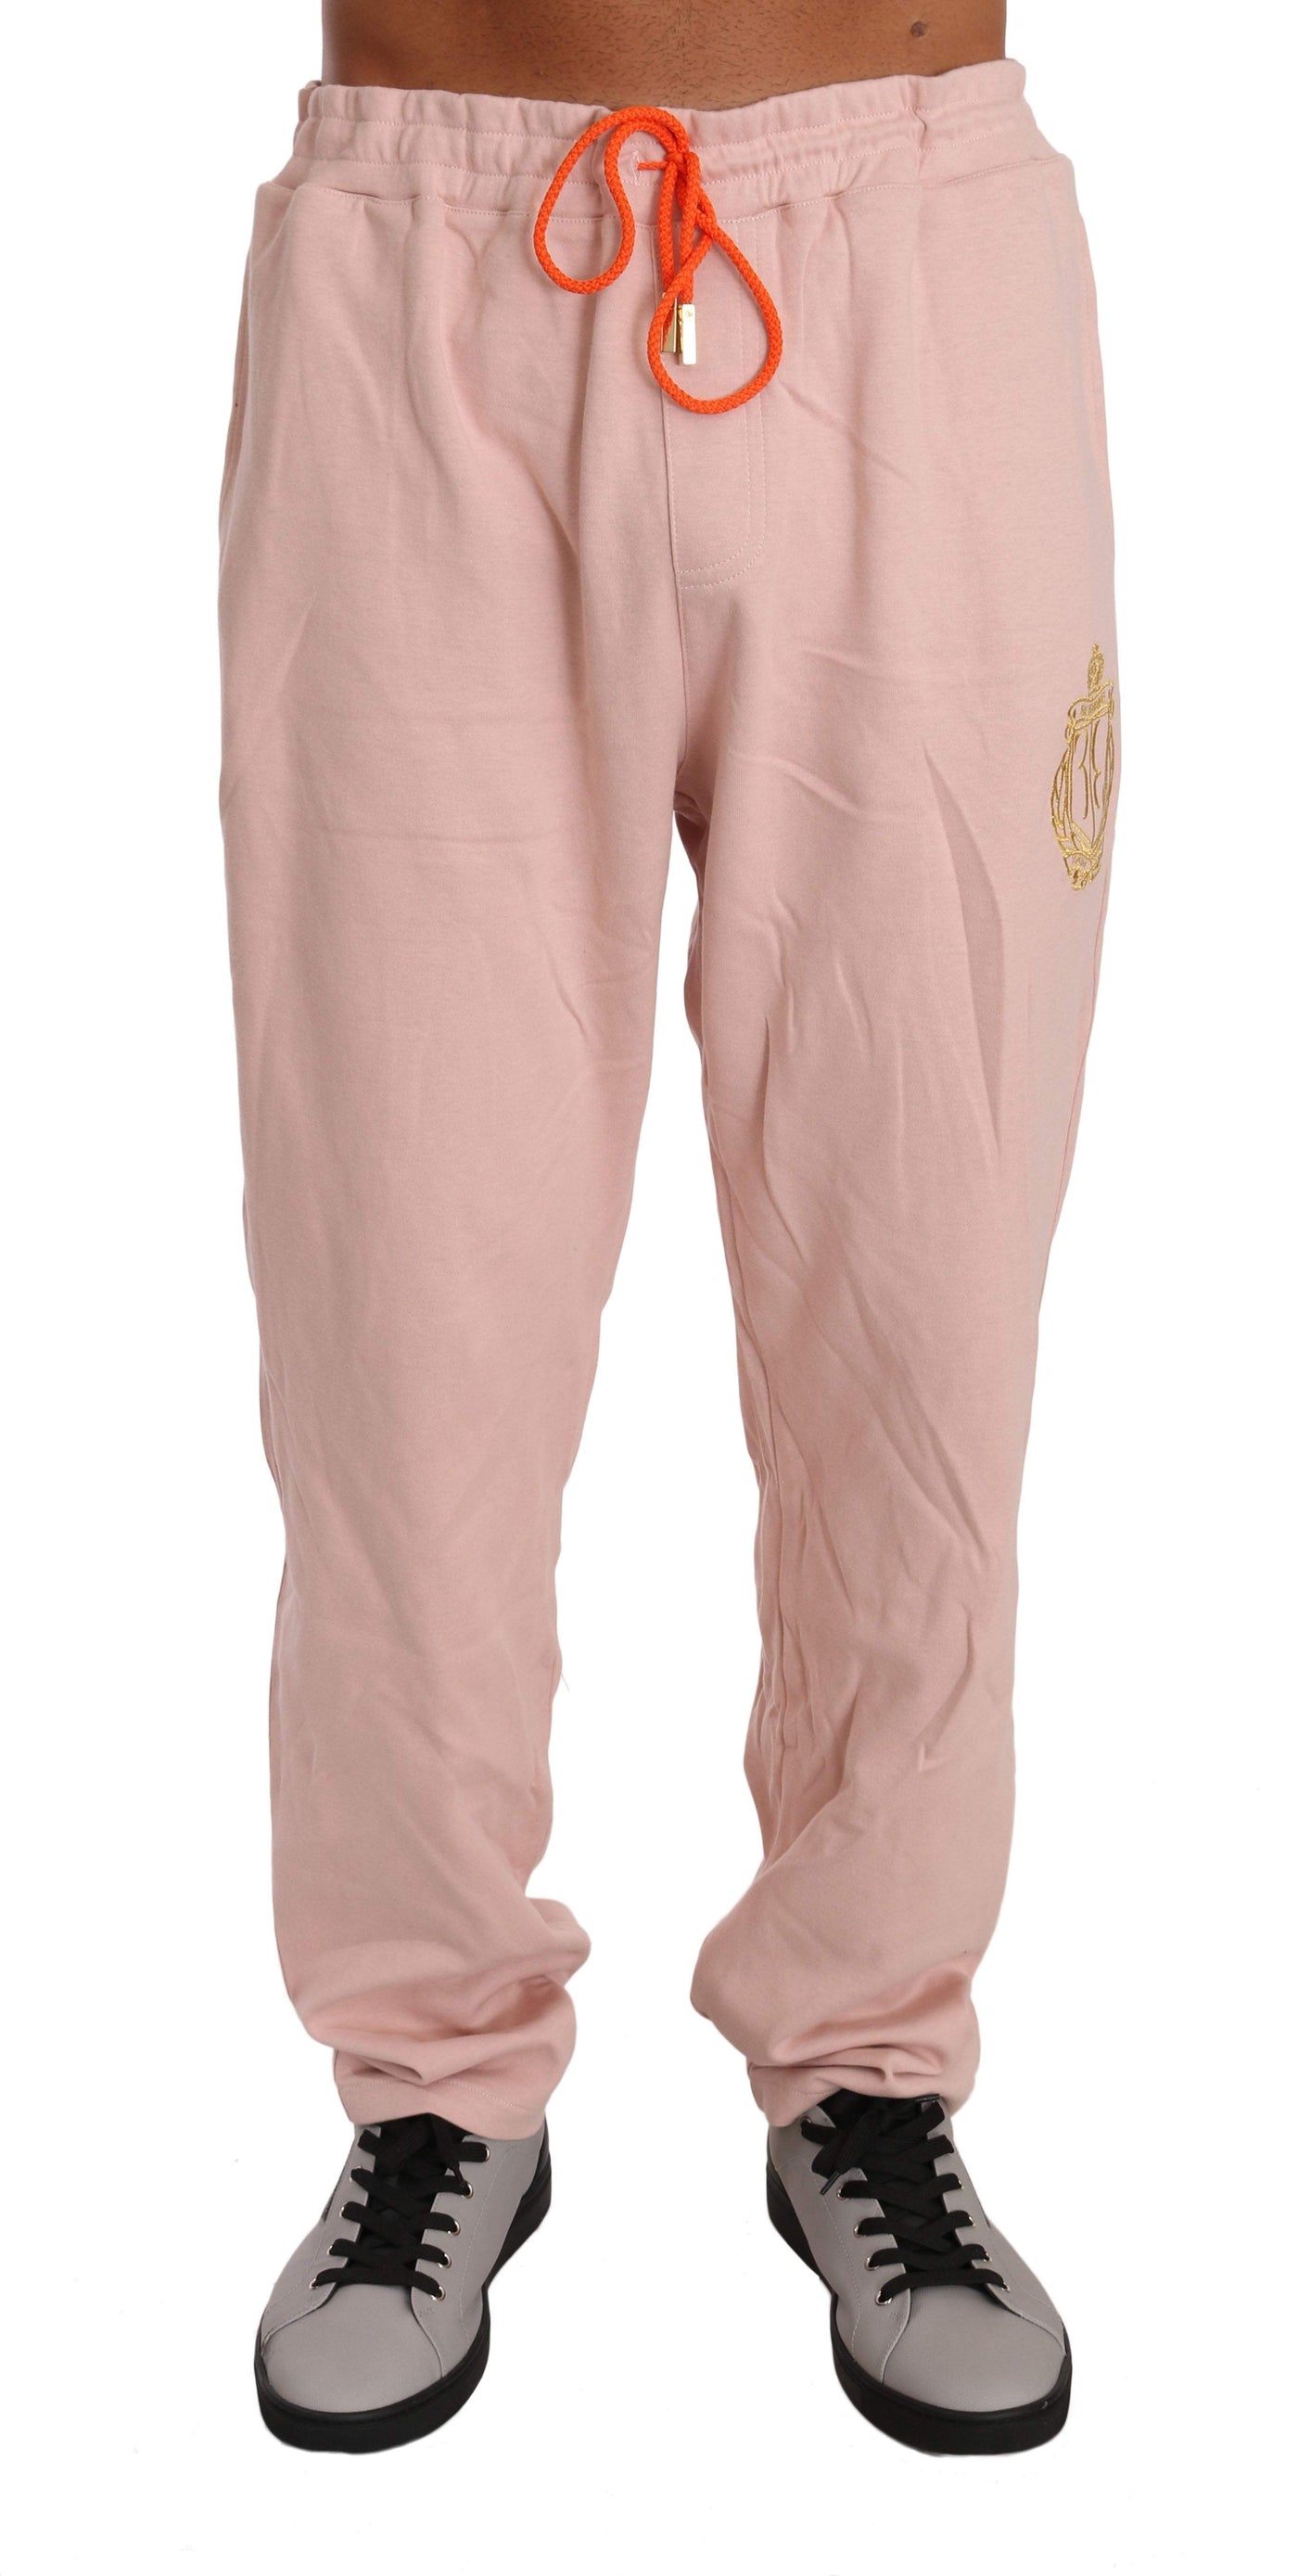 Billionaire Italian Couture  Cotton Hooded Sweater Pants  Tracksuit #men, Billionaire Italian Couture, Catch, feed-agegroup-adult, feed-color-pink, feed-gender-male, feed-size-L, feed-size-XL, feed-size-XXL, Gender_Men, Kogan, L, Men - New Arrivals, Pink, Sweatsuit - Men - Clothing, XL, XXL at SEYMAYKA